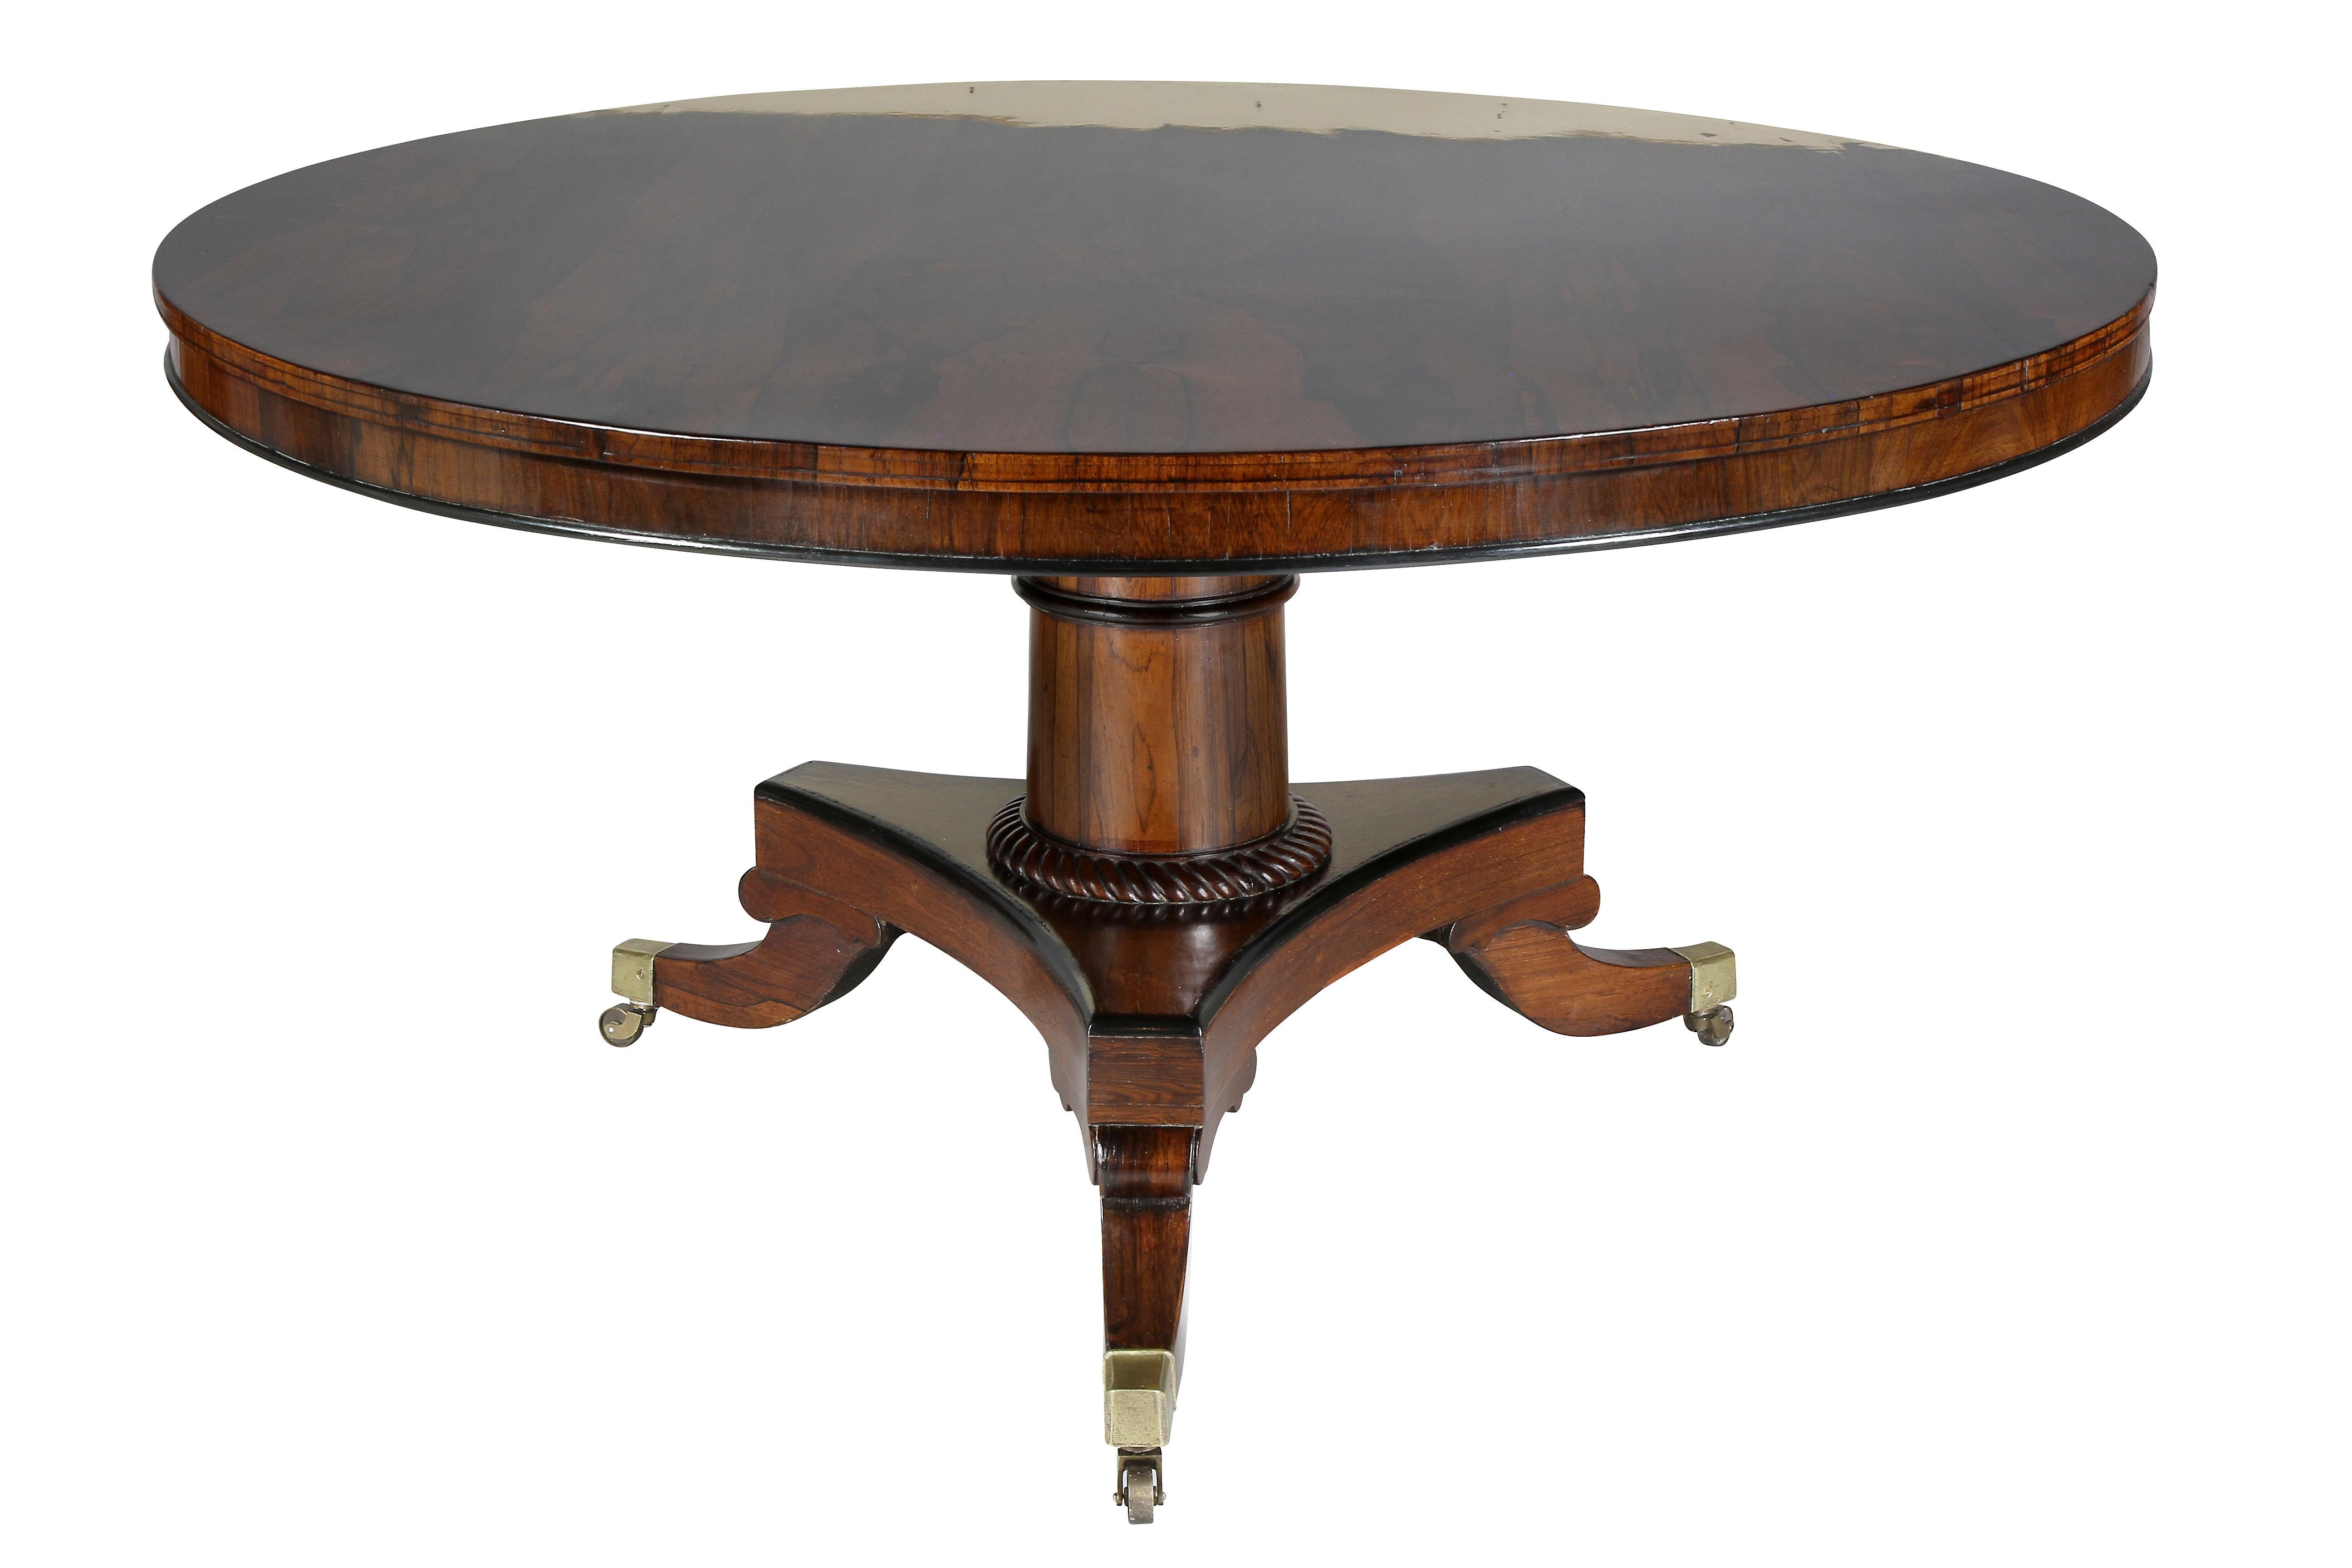 Round top with fabulous figure over a conforming apron, the turned support with rope carved base joining a tripartite base with three saber legs ending on casters. Brass latch signed Bullock. George Bullock was an accomplished cabinetmaker and